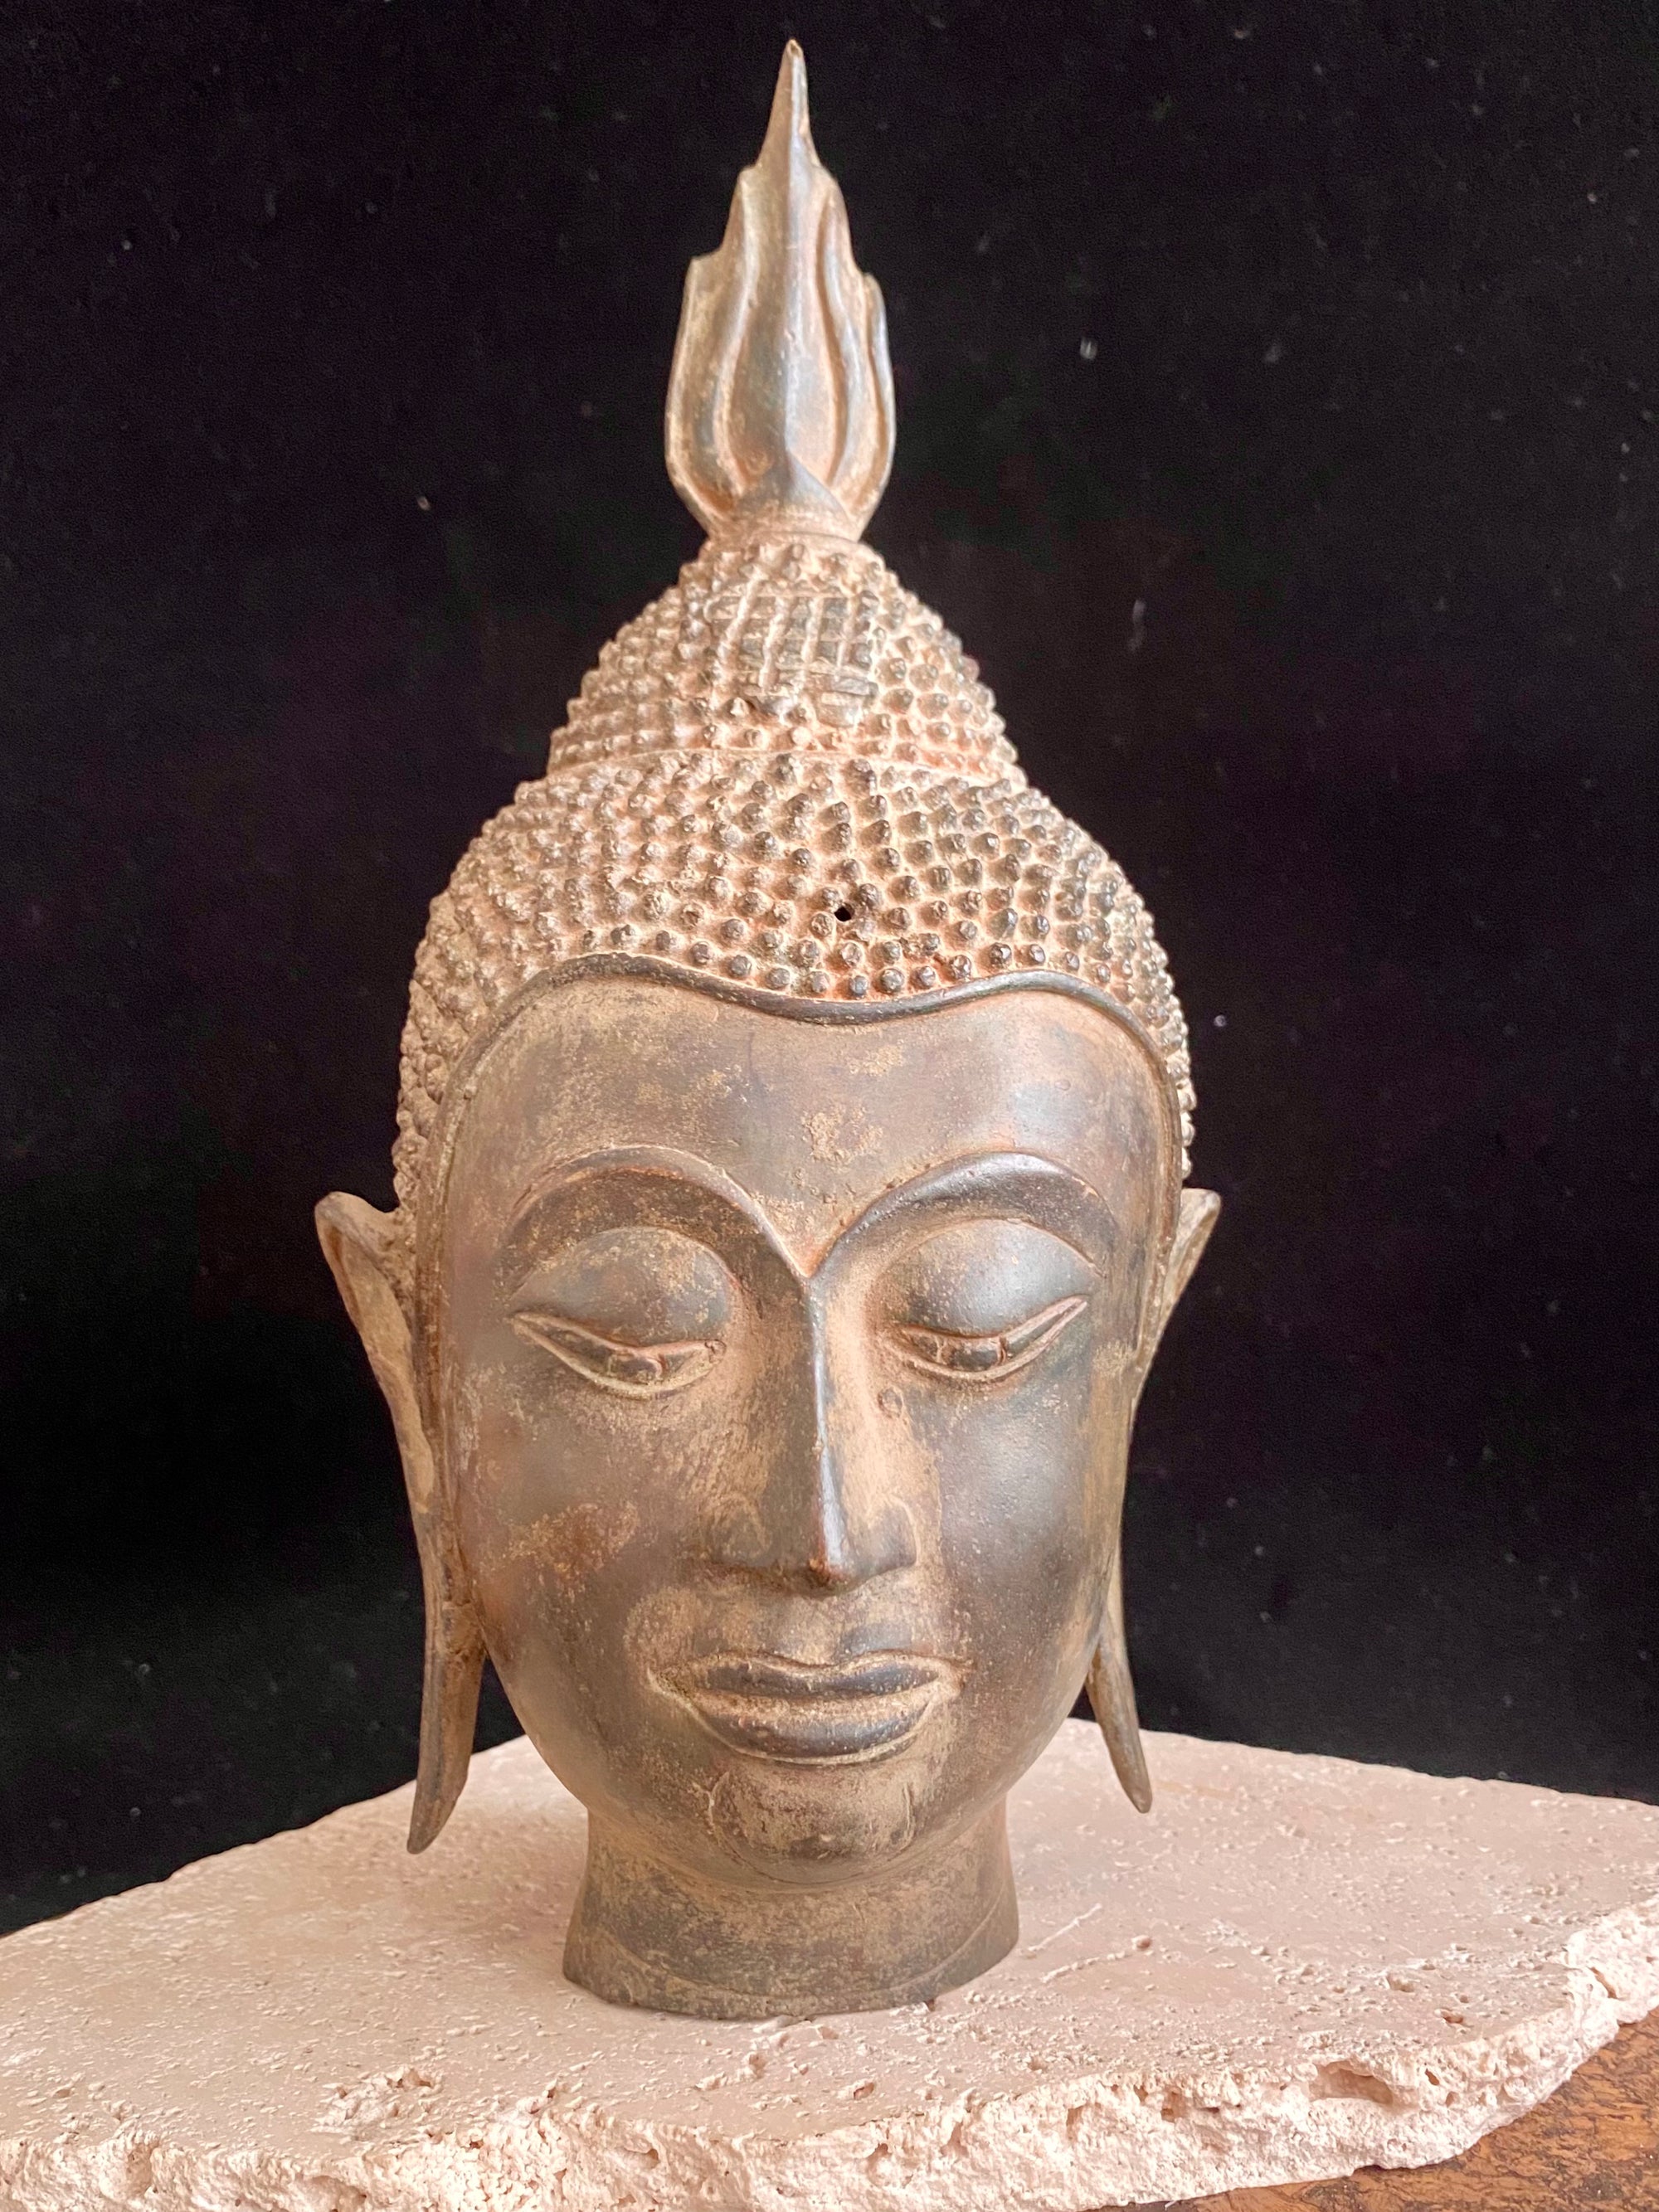 Thai Buddha head. Serene expression, hair topped with the flamed Ushnisha. Sukhothai style, bronze, mid 20th century. A softly contoured face with the bow shaped lips, prominent ears, arched eyebrows and aristocratic features typical of this style of work. Measurements: height 25 cm, width 11 cm